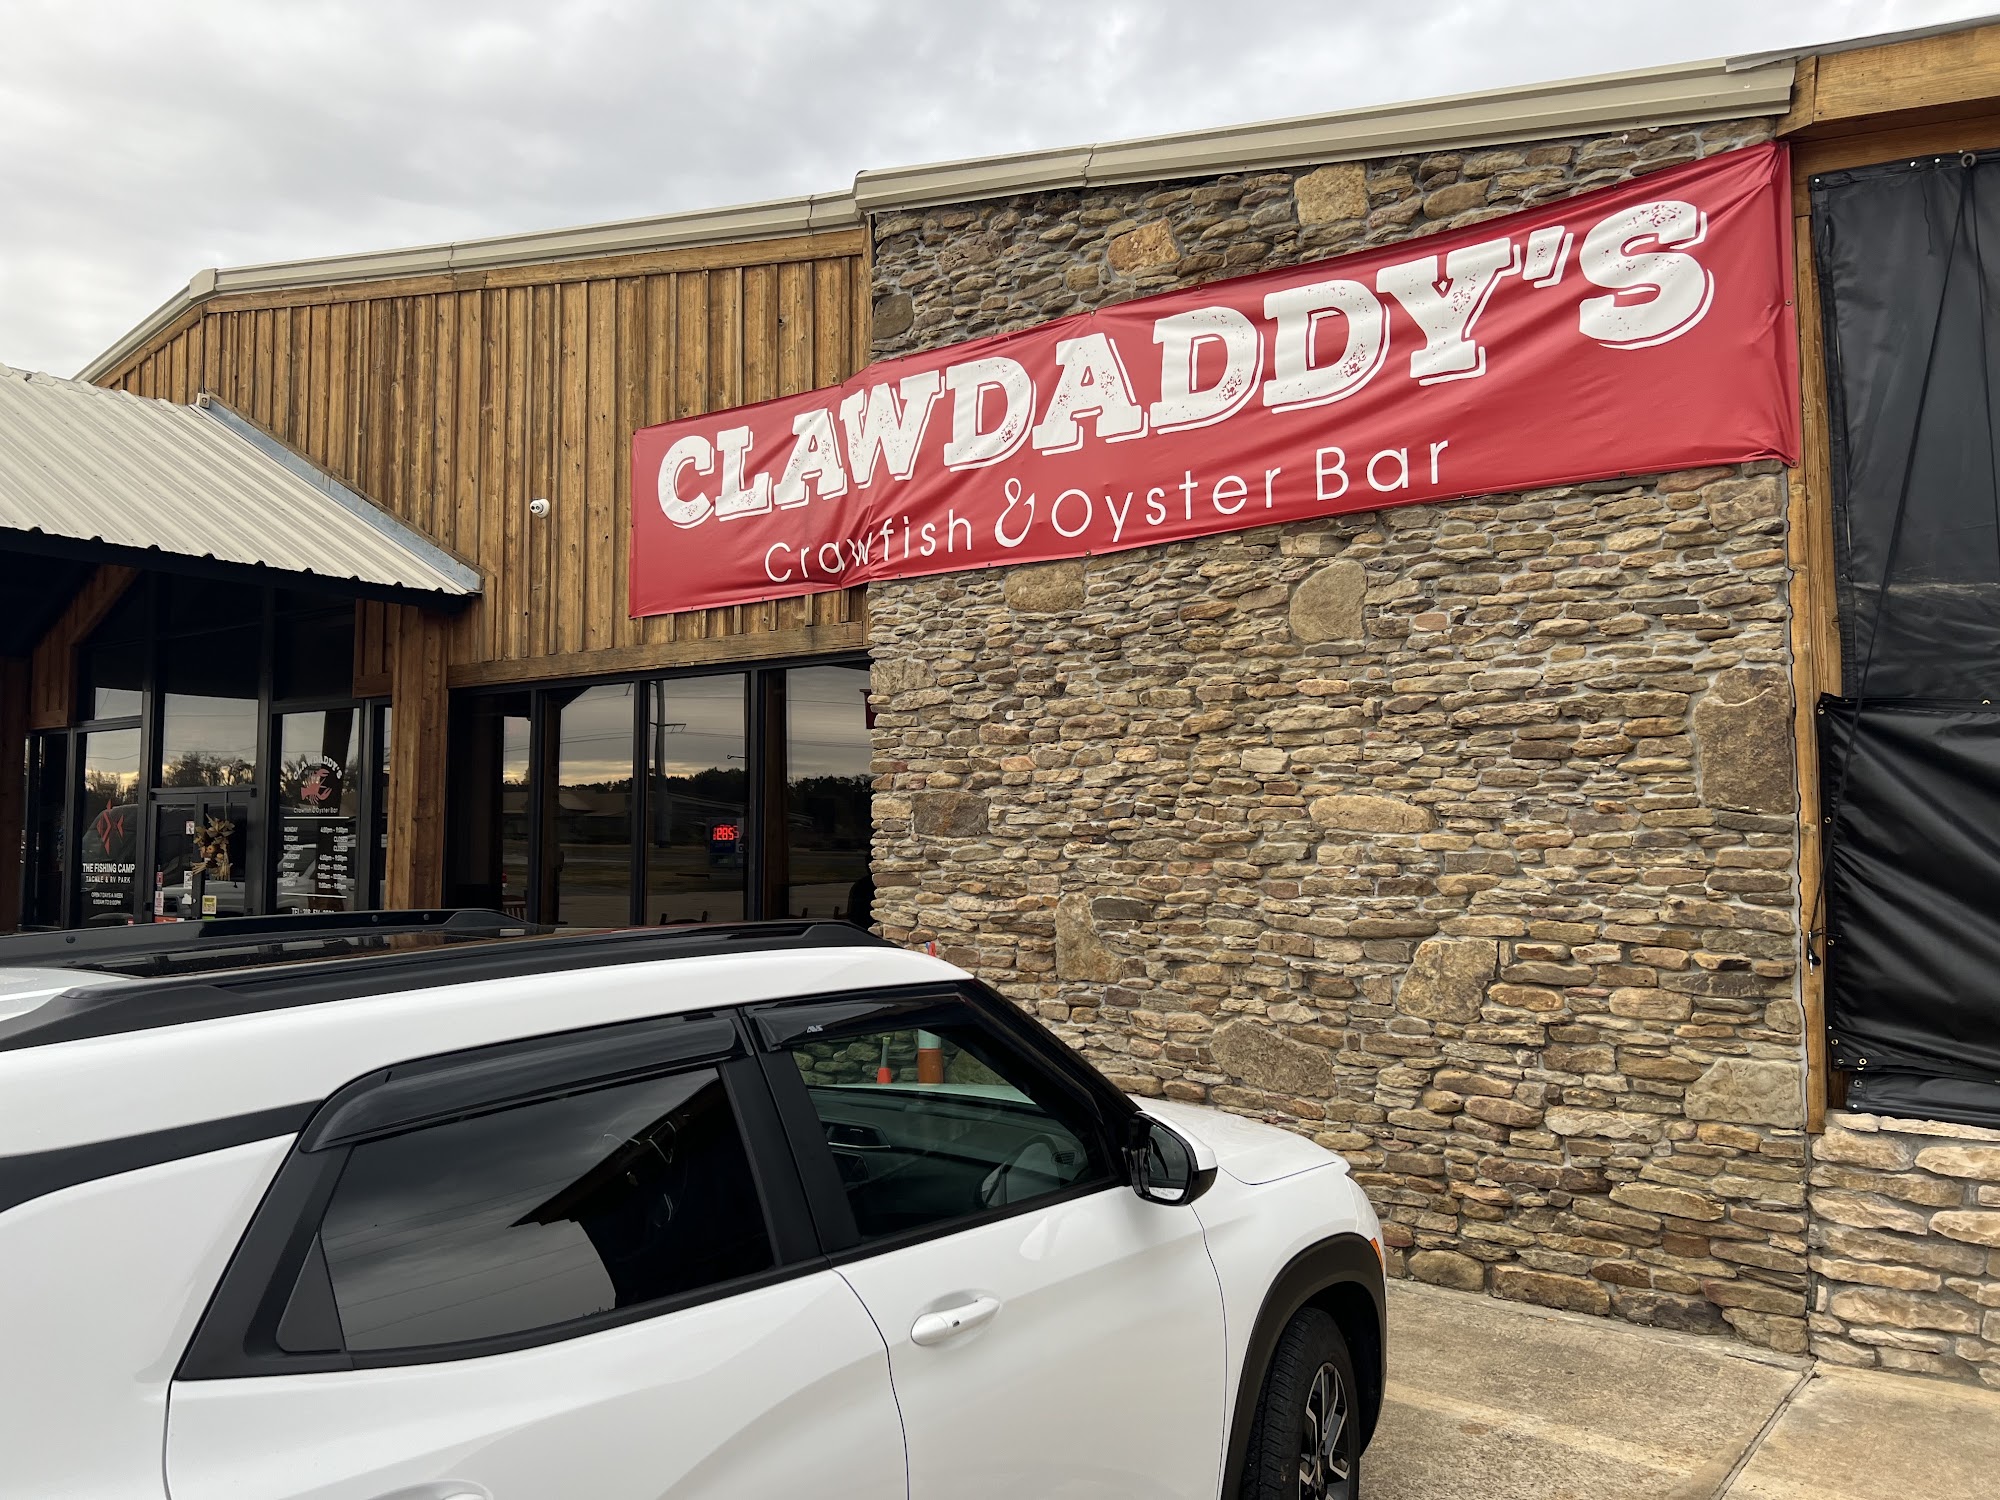 Claw Daddy’s Crawfish and Oyster Bar